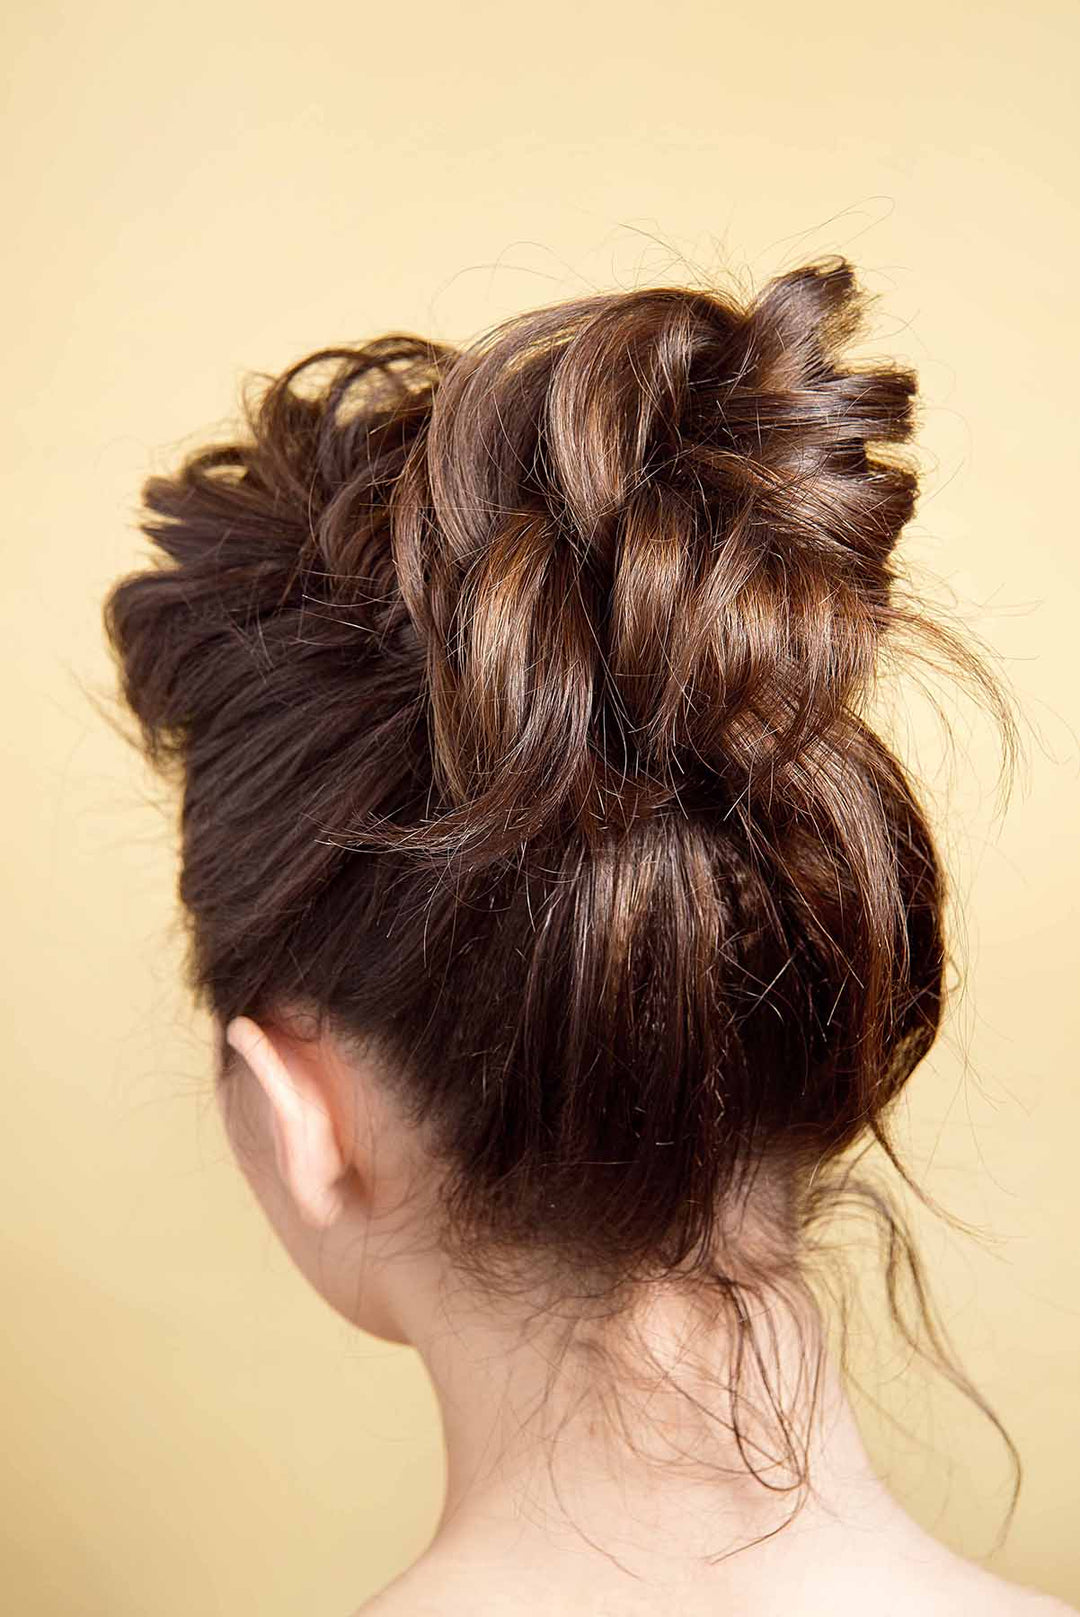 How to Do a Messy Bun with Fake Hair